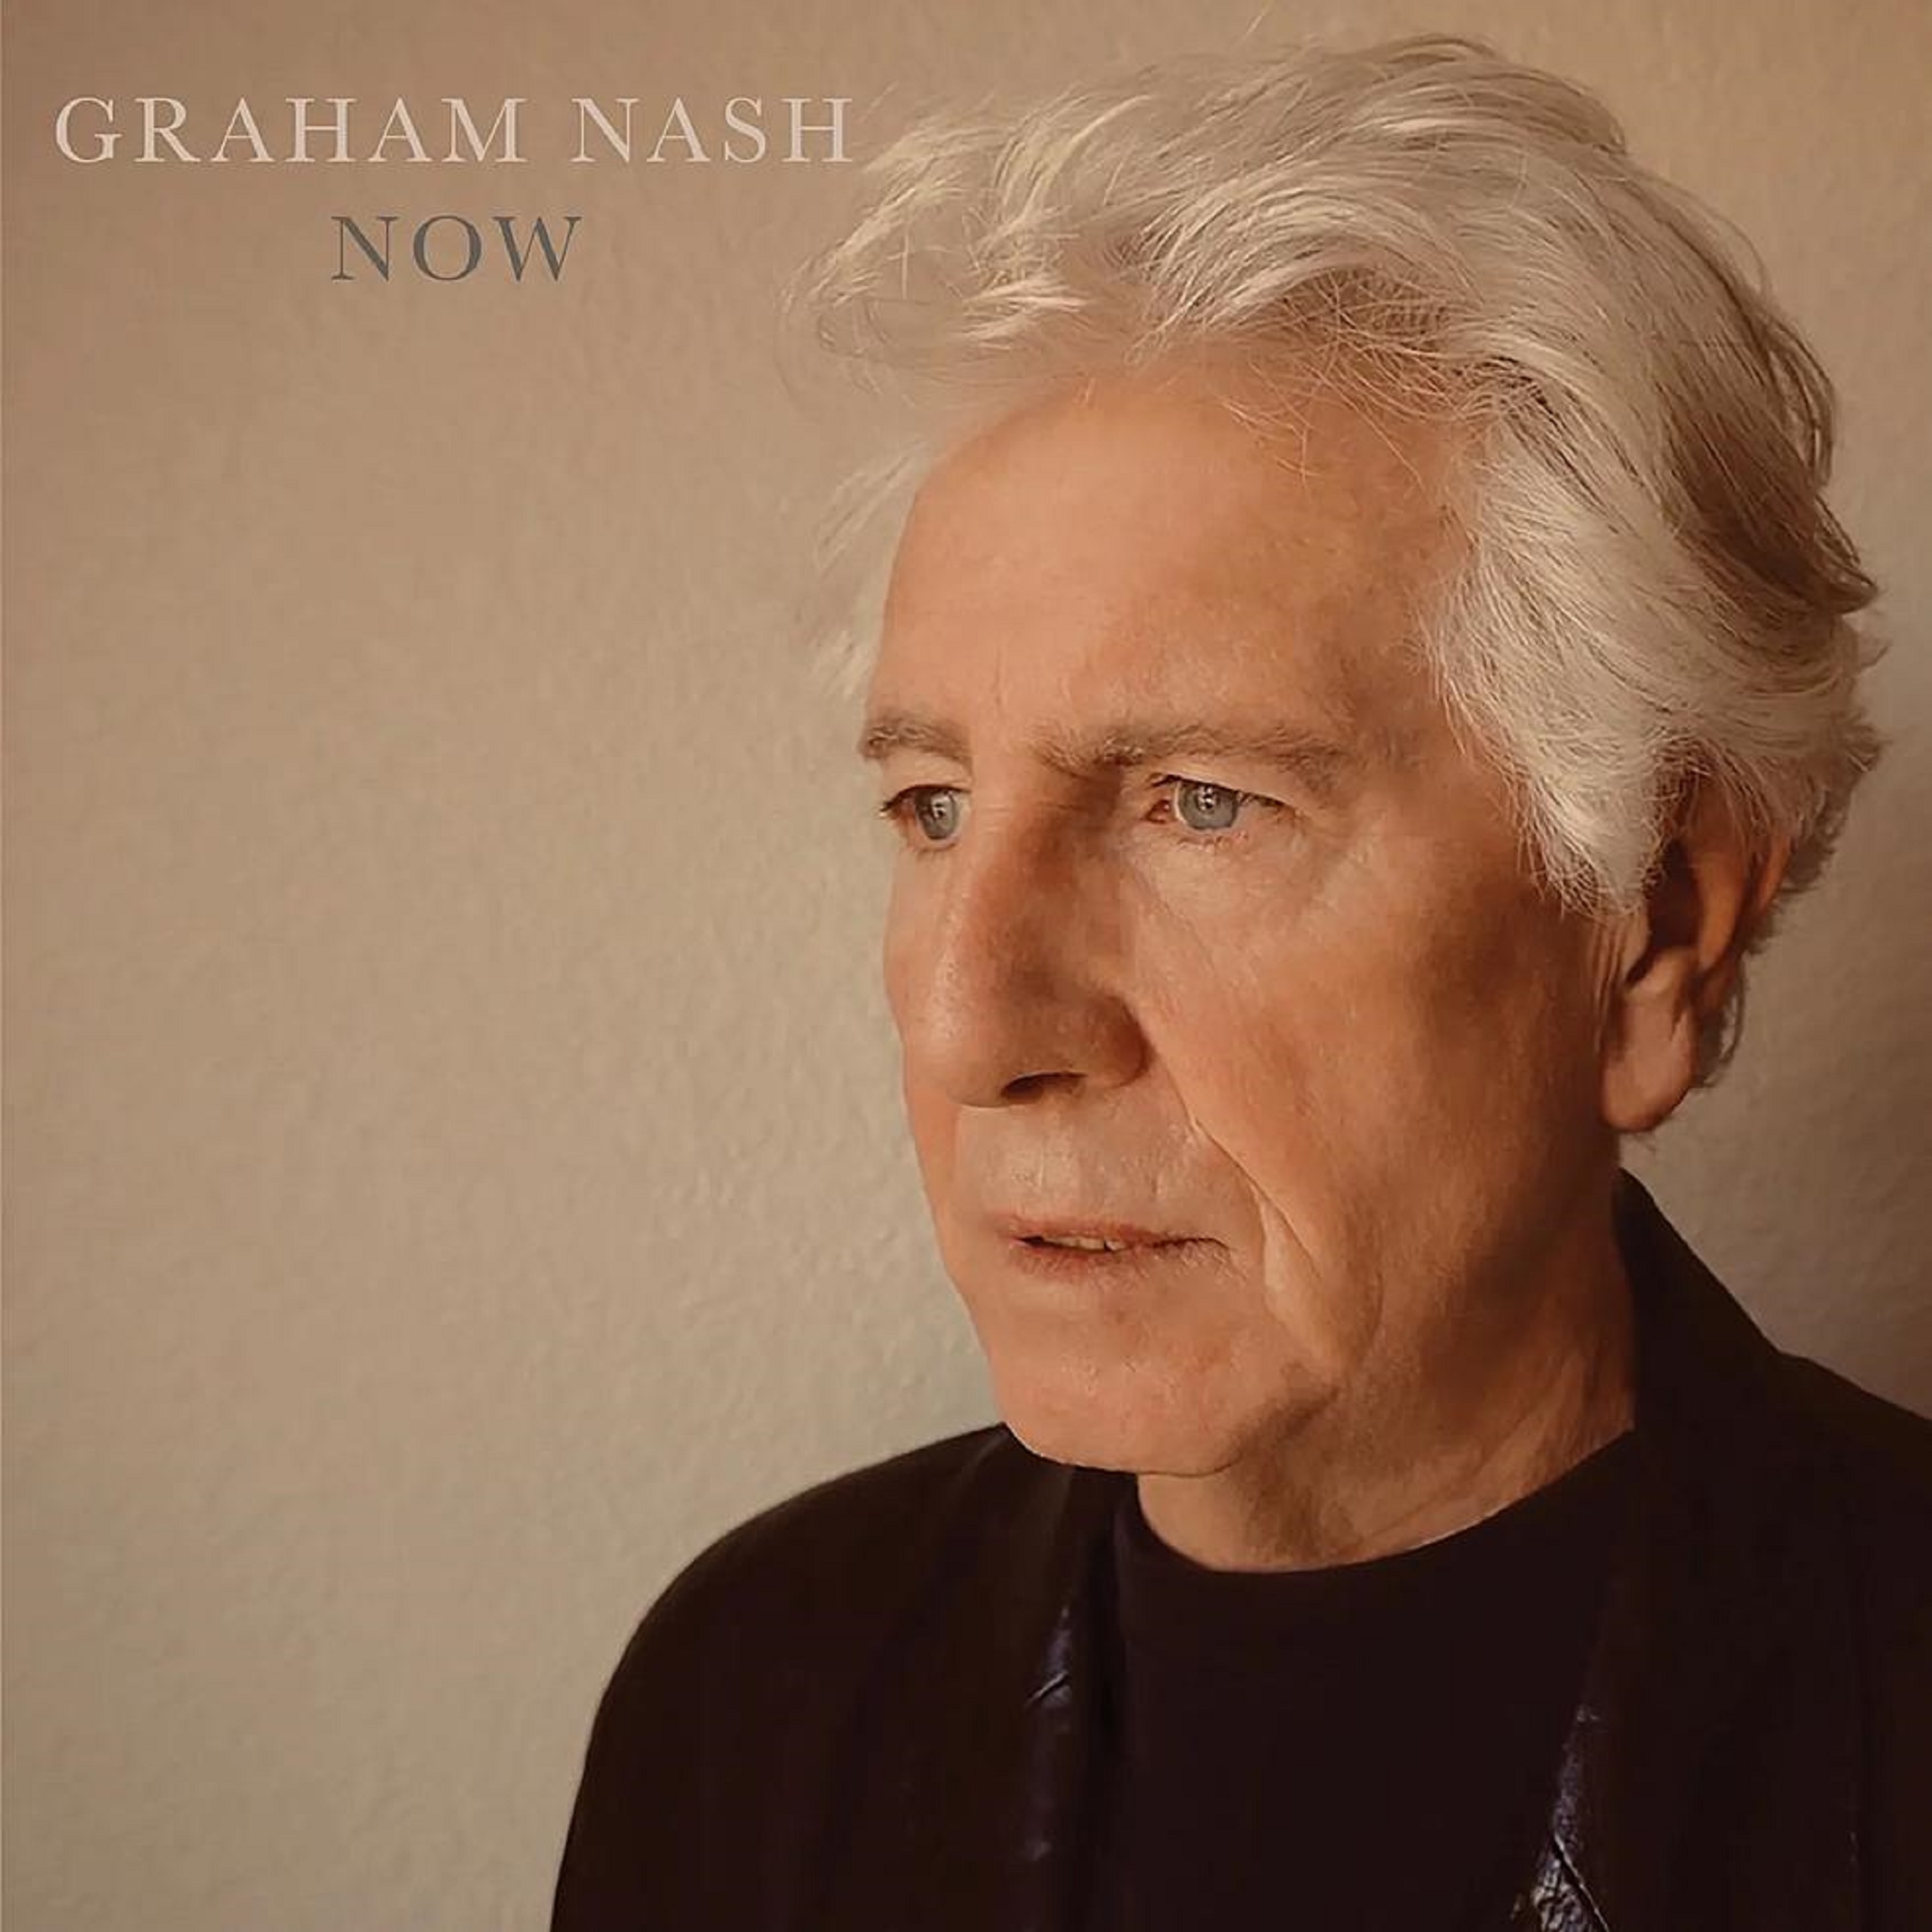 Graham Nash's first new studio album in 7 years, "Now," out 5/19 on BMG; new single "Right Now" premieres today